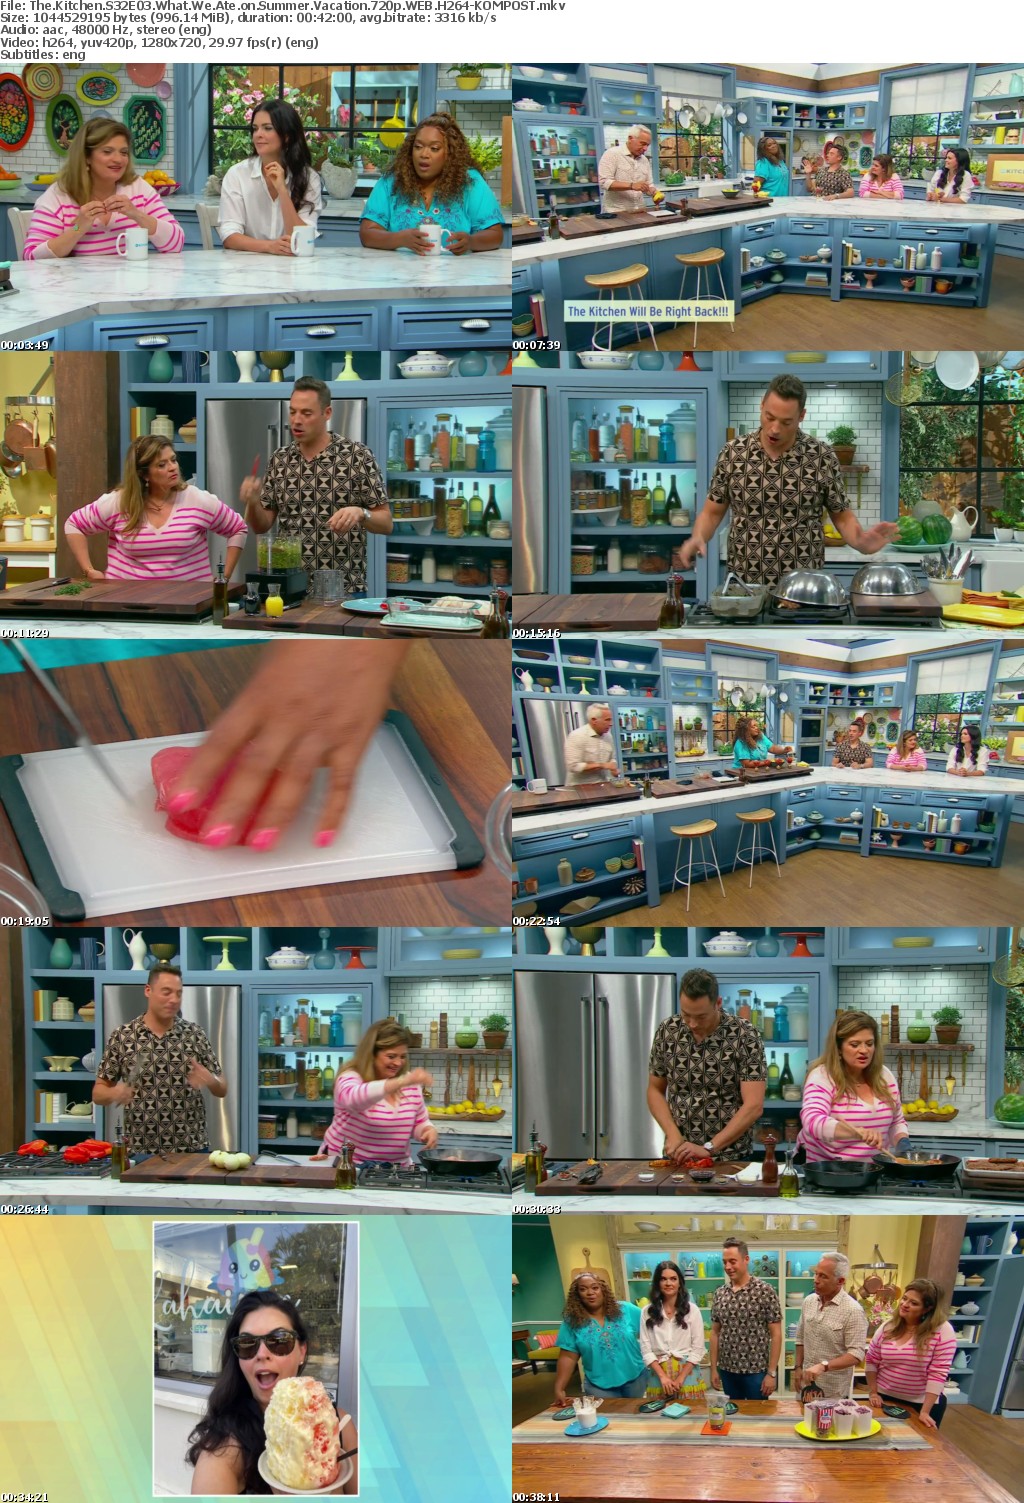 The Kitchen S32E03 What We Ate on Summer Vacation 720p WEB H264-KOMPOST